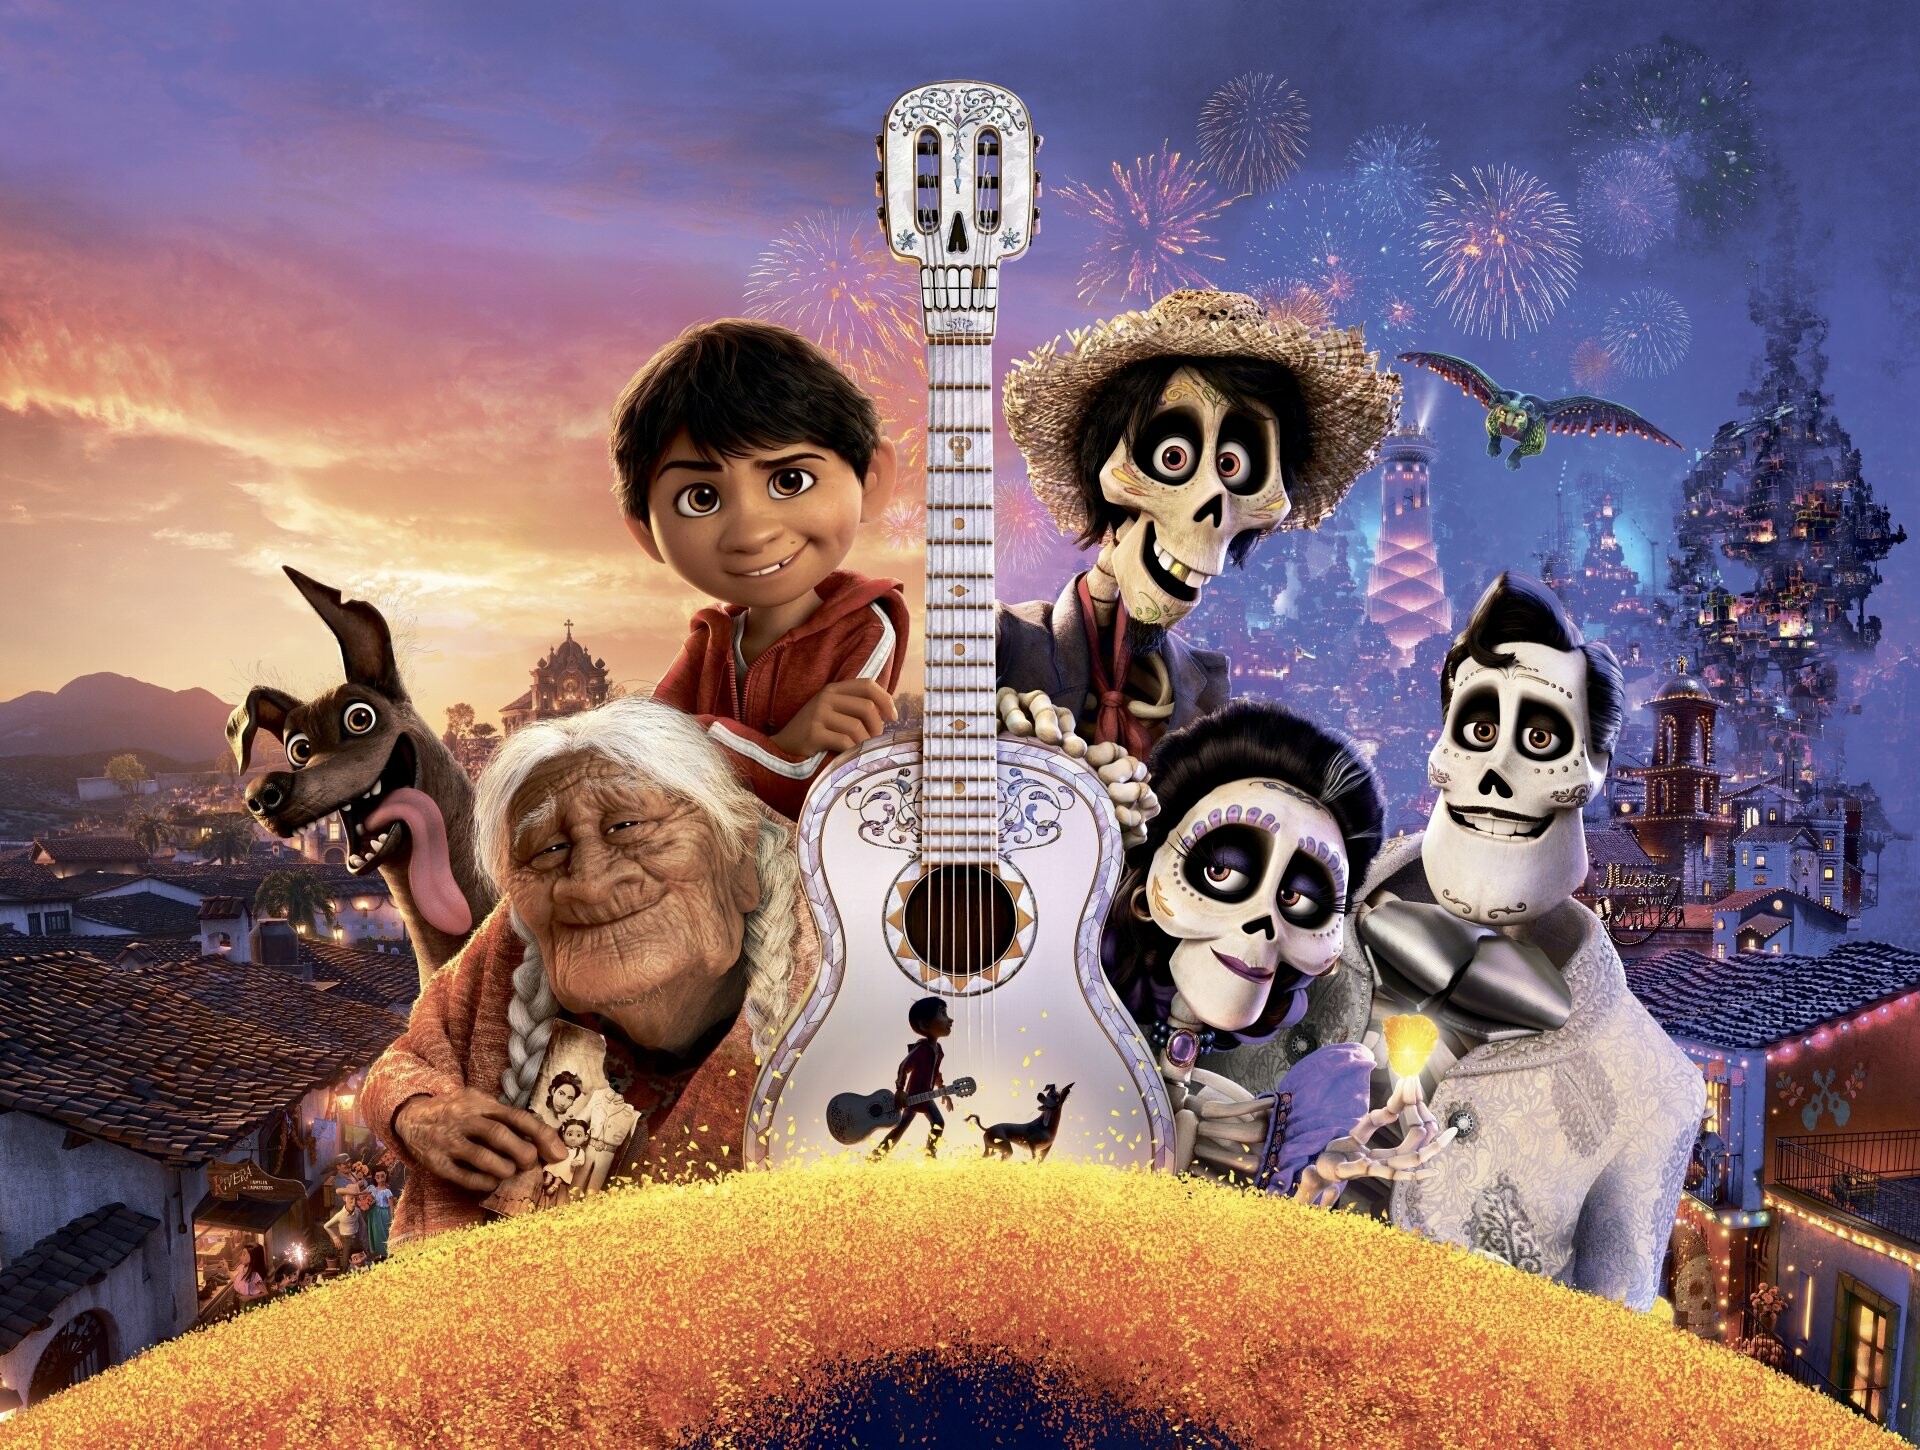 Coco (Cartoon): The sprightly story of a young boy who wants to be a musician and somehow finds himself communing with talking skeletons in the land of the dead. 1920x1450 HD Background.